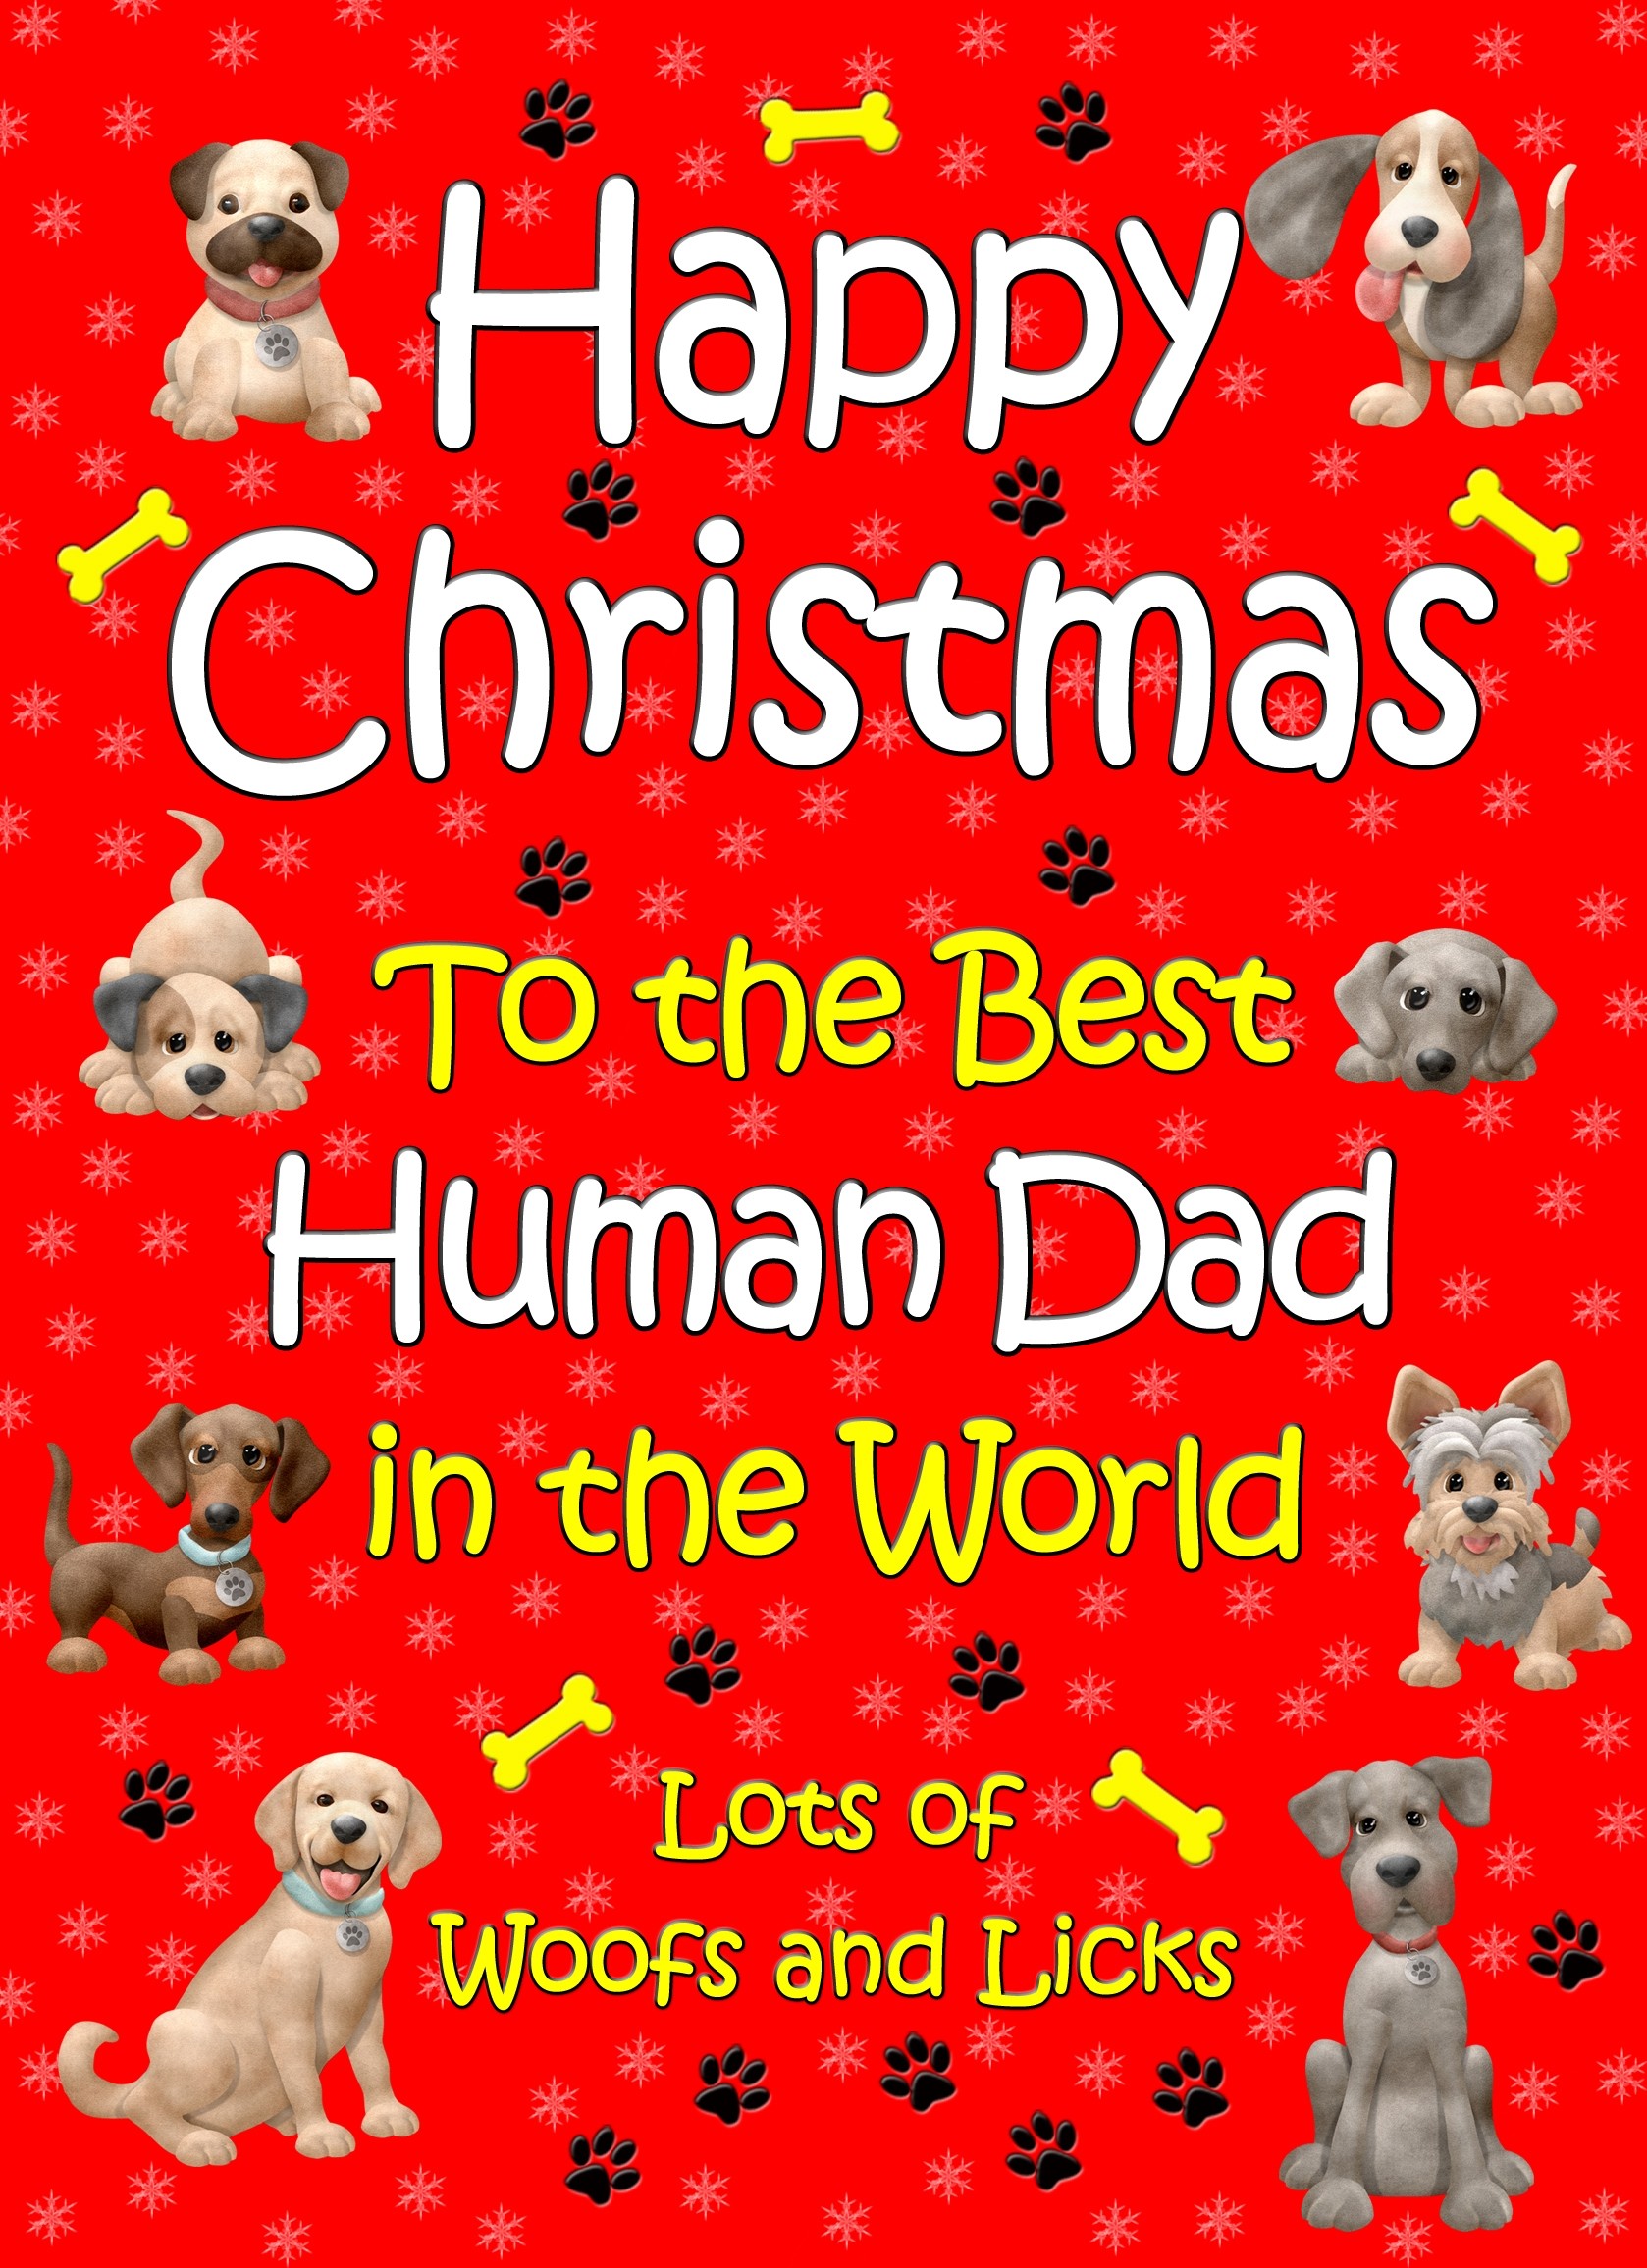 From The Dog  Christmas Card (Red, Human Dad, Happy Christmas)